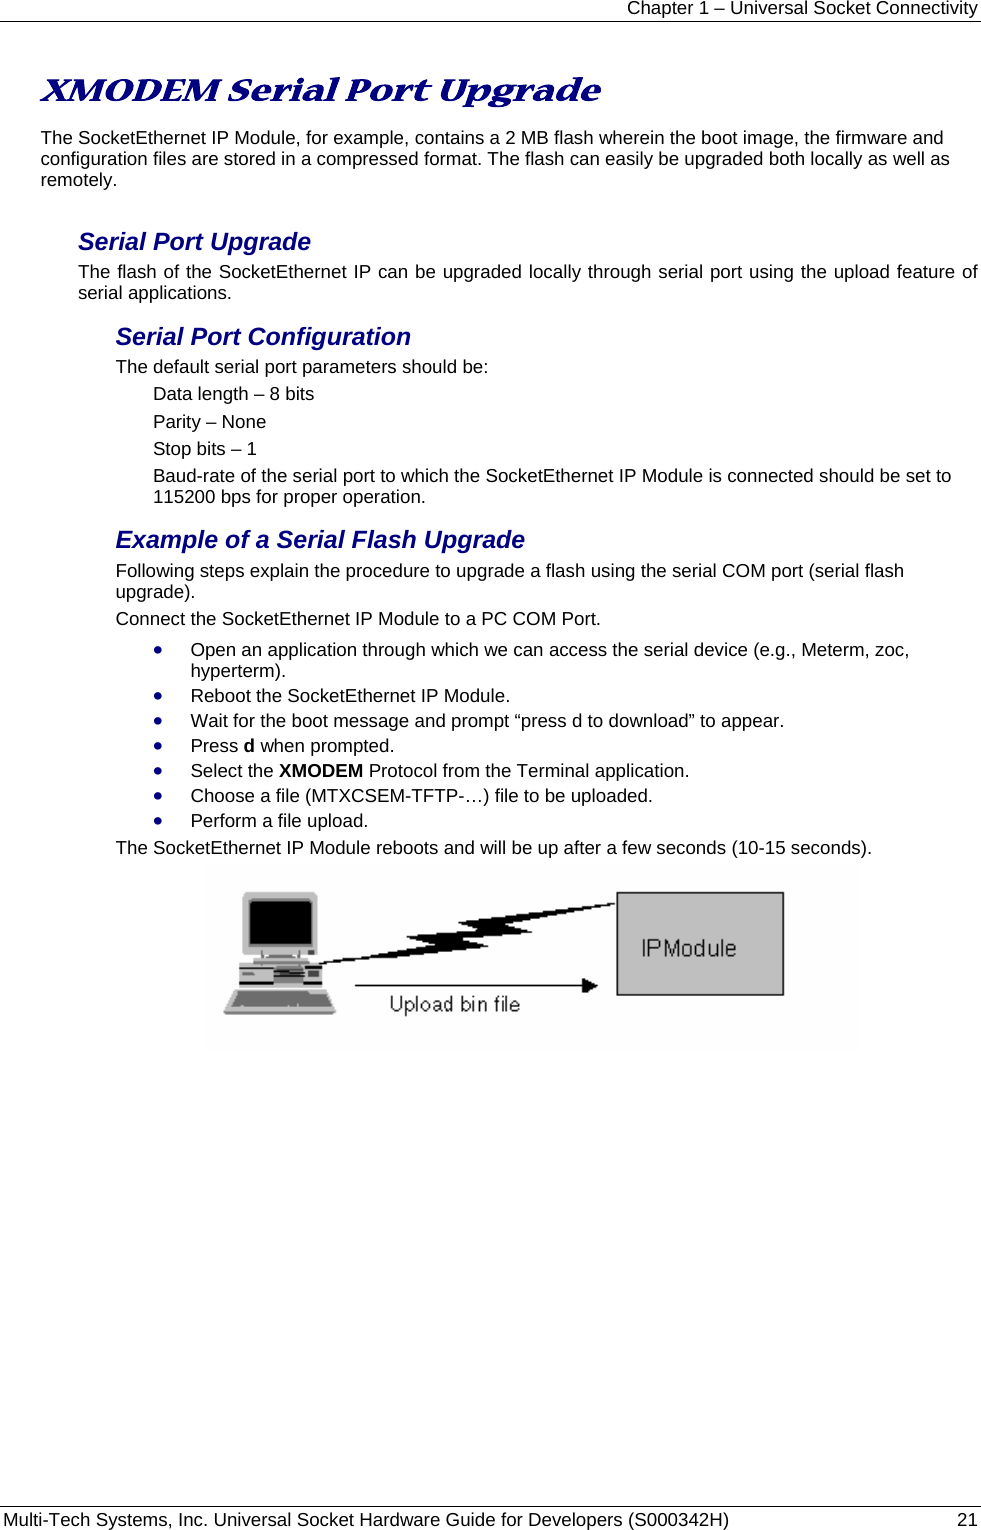 Chapter 1 – Universal Socket Connectivity Multi-Tech Systems, Inc. Universal Socket Hardware Guide for Developers (S000342H)  21   XMODEM Serial Port Upgrade  The SocketEthernet IP Module, for example, contains a 2 MB flash wherein the boot image, the firmware and configuration files are stored in a compressed format. The flash can easily be upgraded both locally as well as remotely. Serial Port Upgrade The flash of the SocketEthernet IP can be upgraded locally through serial port using the upload feature of serial applications. Serial Port Configuration The default serial port parameters should be: Data length – 8 bits Parity – None Stop bits – 1 Baud-rate of the serial port to which the SocketEthernet IP Module is connected should be set to 115200 bps for proper operation. Example of a Serial Flash Upgrade Following steps explain the procedure to upgrade a flash using the serial COM port (serial flash upgrade). Connect the SocketEthernet IP Module to a PC COM Port. • Open an application through which we can access the serial device (e.g., Meterm, zoc, hyperterm). • Reboot the SocketEthernet IP Module. • Wait for the boot message and prompt “press d to download” to appear. • Press d when prompted. • Select the XMODEM Protocol from the Terminal application.  • Choose a file (MTXCSEM-TFTP-…) file to be uploaded. • Perform a file upload. The SocketEthernet IP Module reboots and will be up after a few seconds (10-15 seconds).   